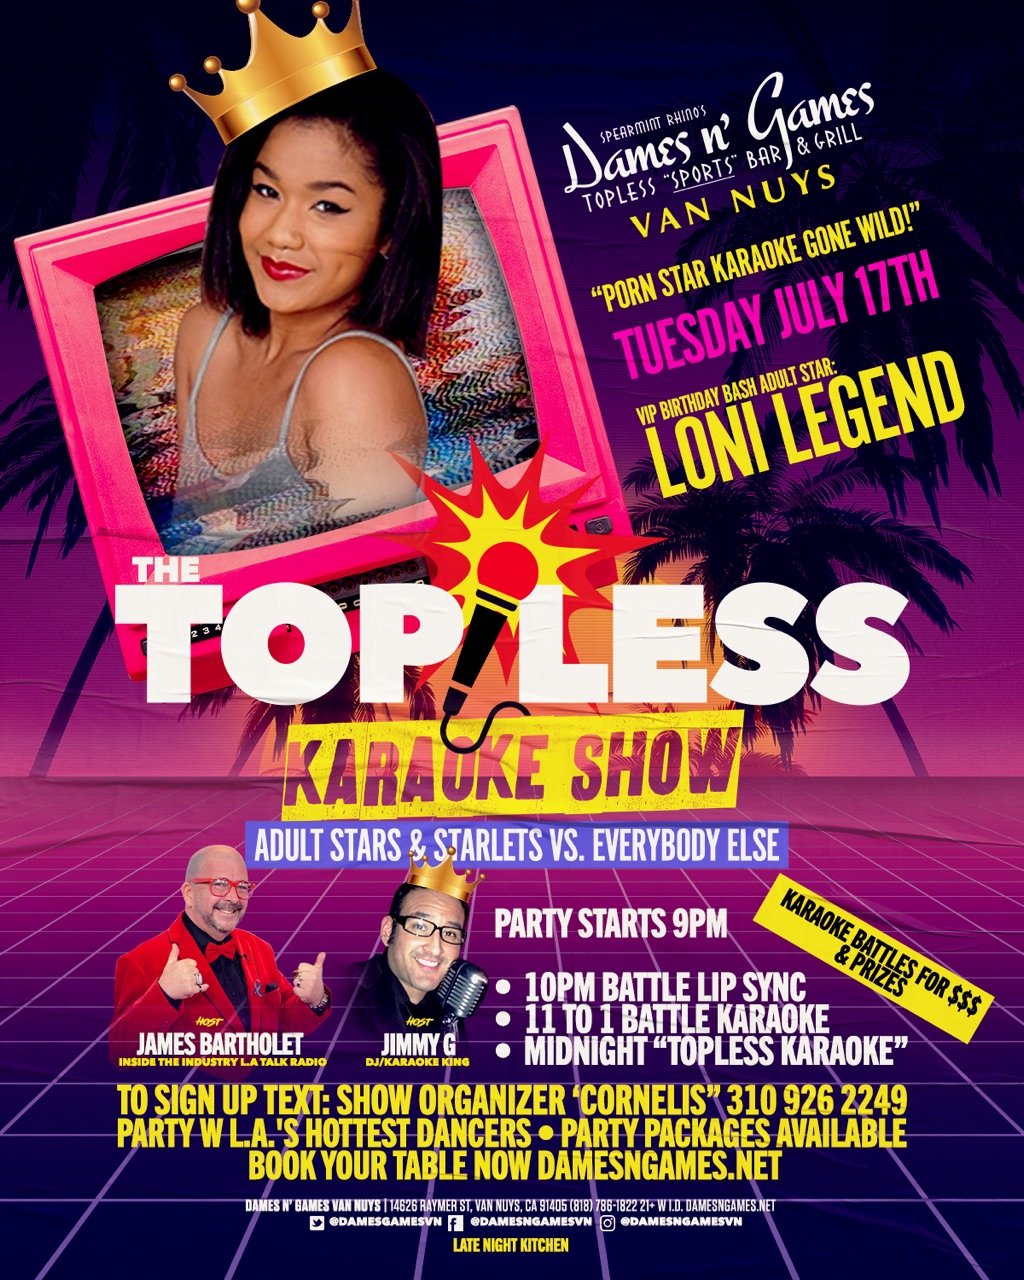 “Loni Legend Birthday Party July 17th, Appearing at Exxotica Miami”